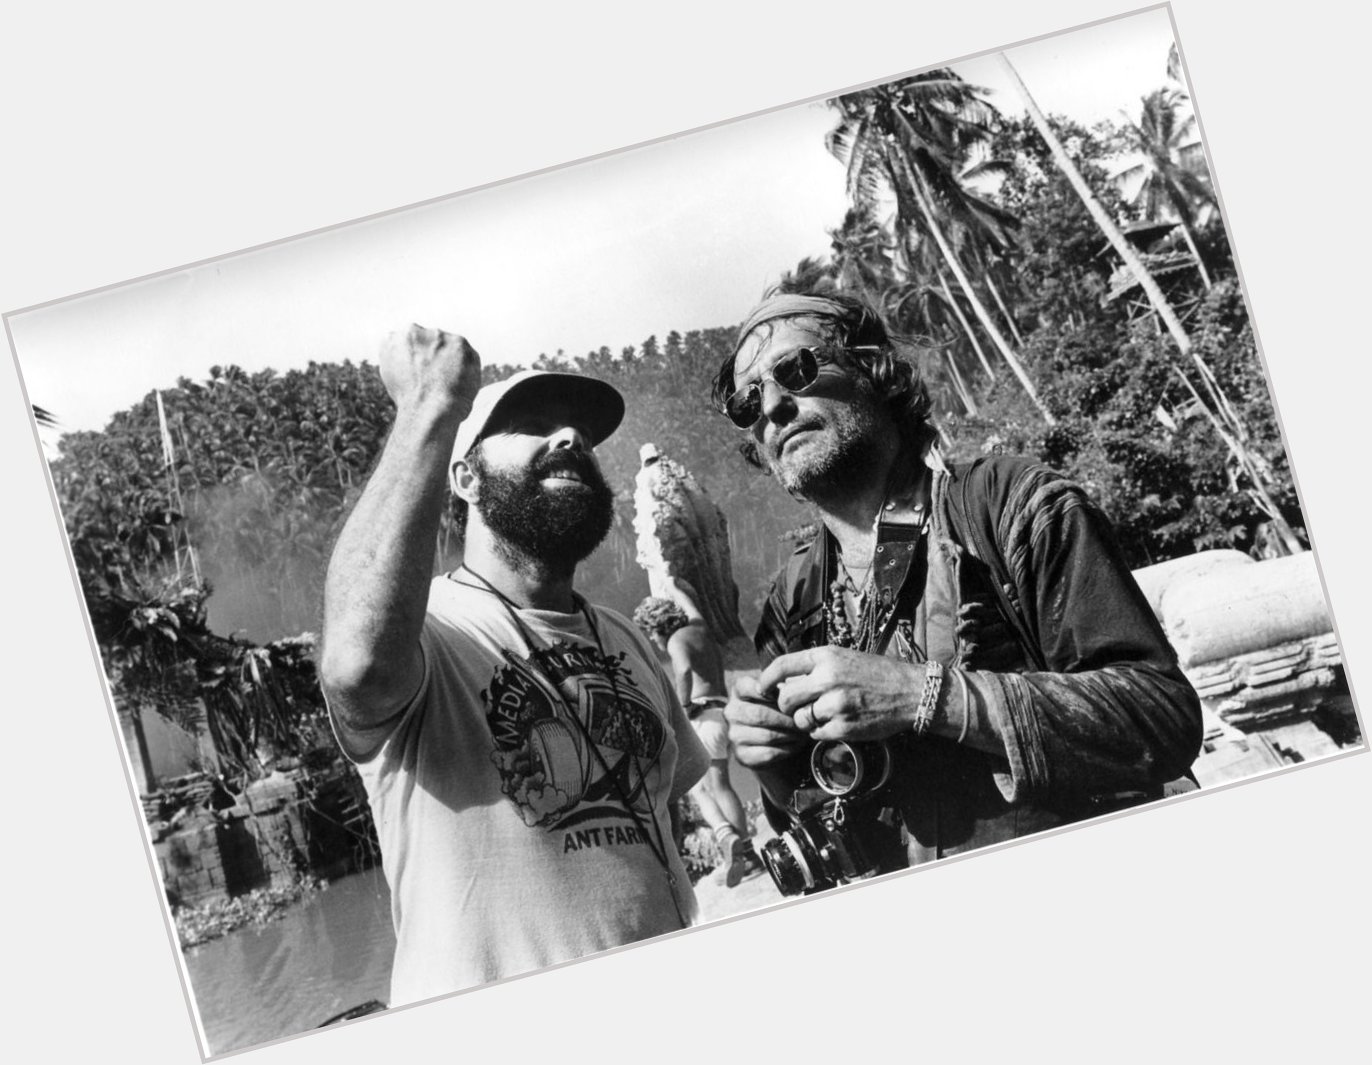 Happy birthday too to Dennis Hopper.

Here with Francis Ford Coppola on the set of Apocalypse Now. 